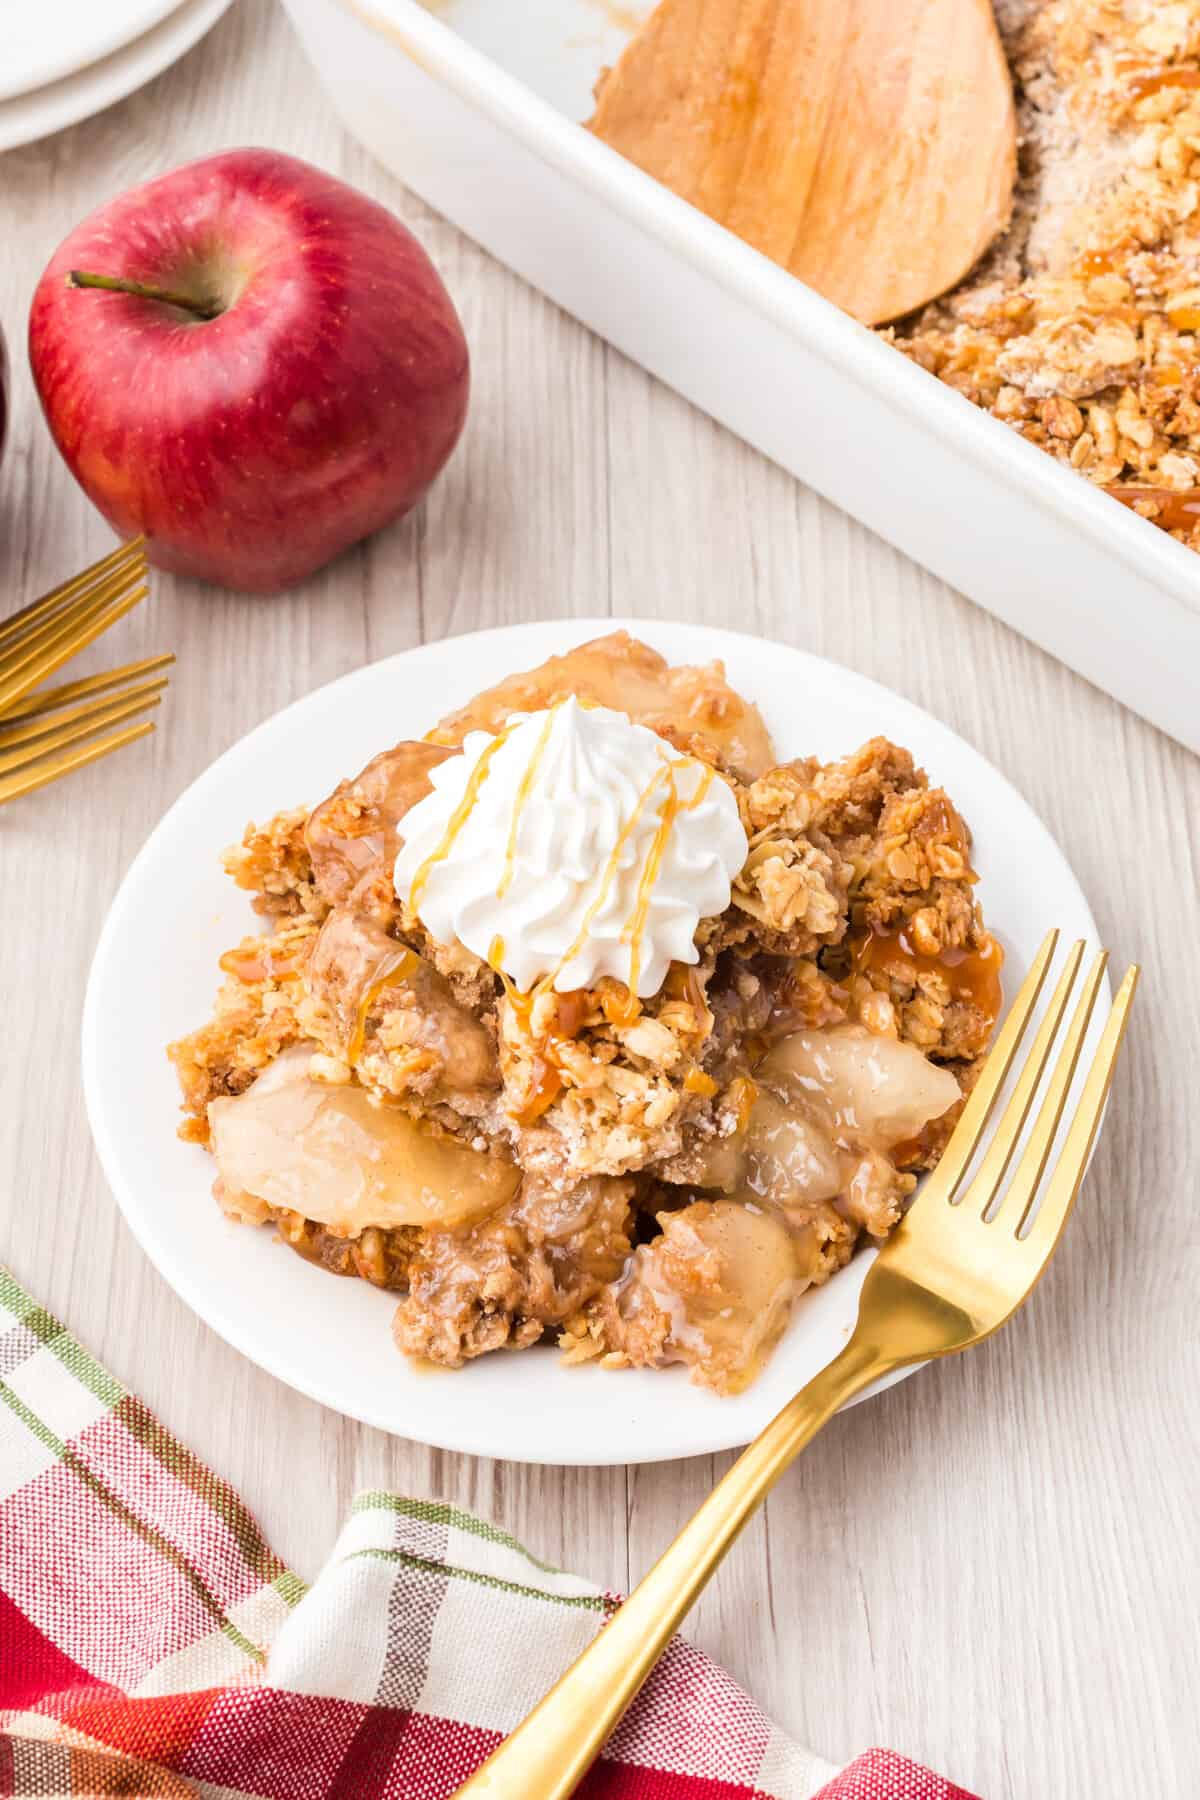 Serving of apple crisp topped with caramel sauce and whipped cream.